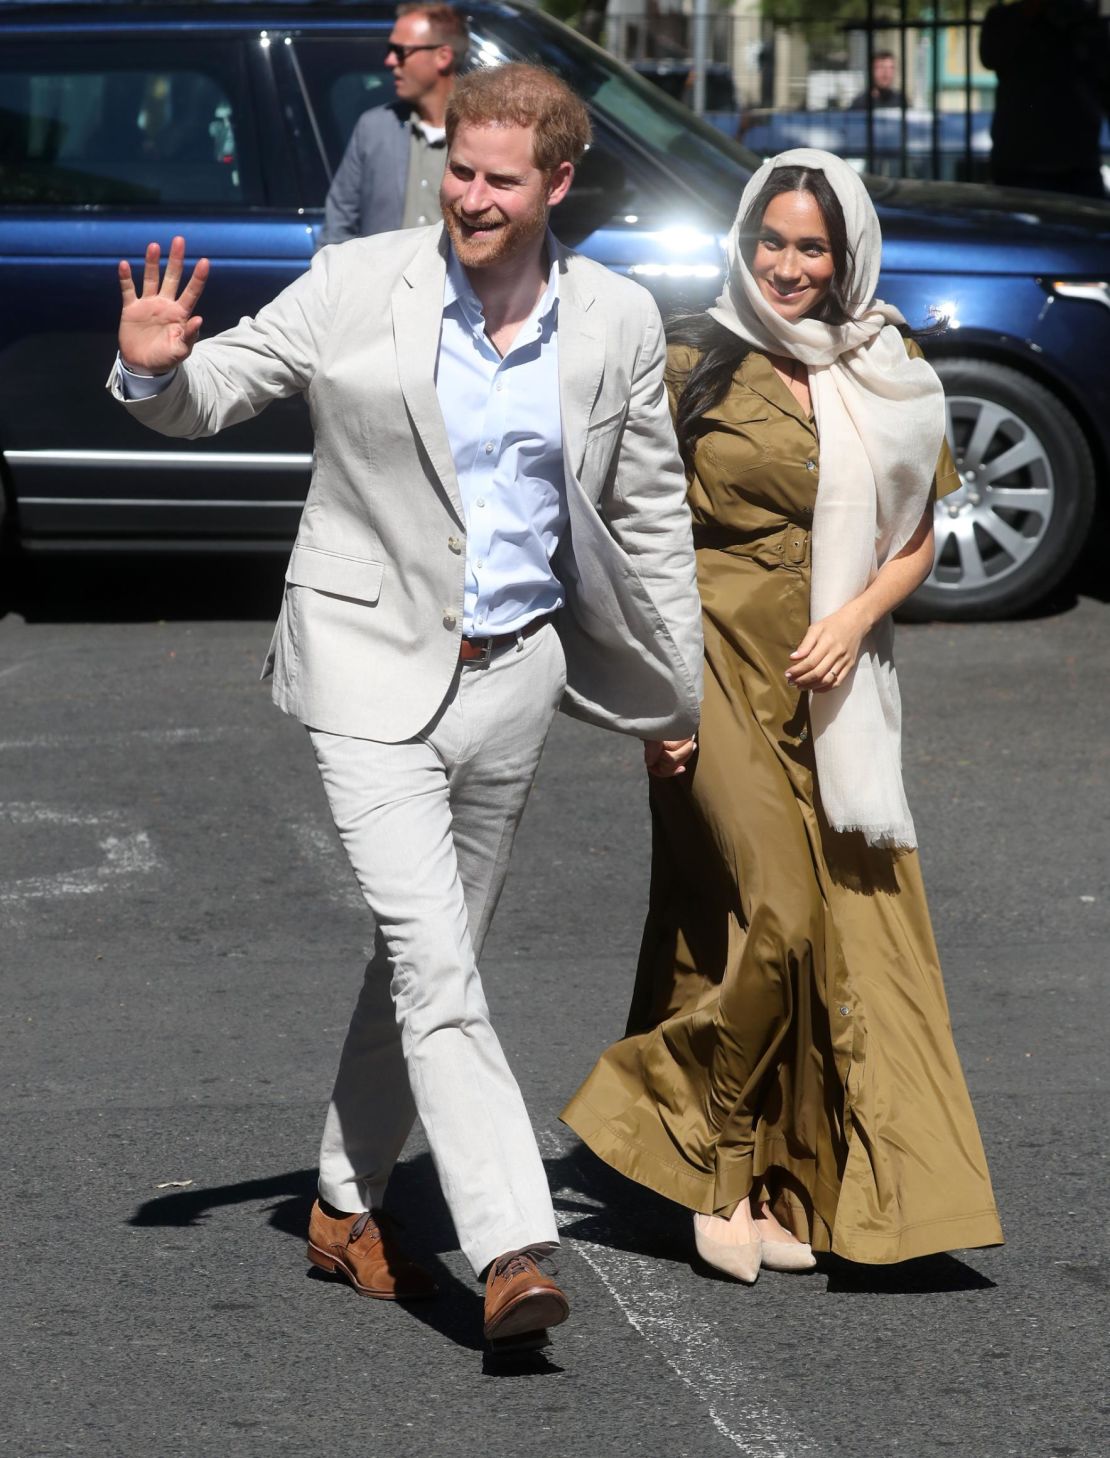 Prince Harry, Duke of Sussex and Meghan, Duchess of Sussex visit Auwal Mosque in Cape Town's Bo-Kaap district during their royal tour of South Africa.